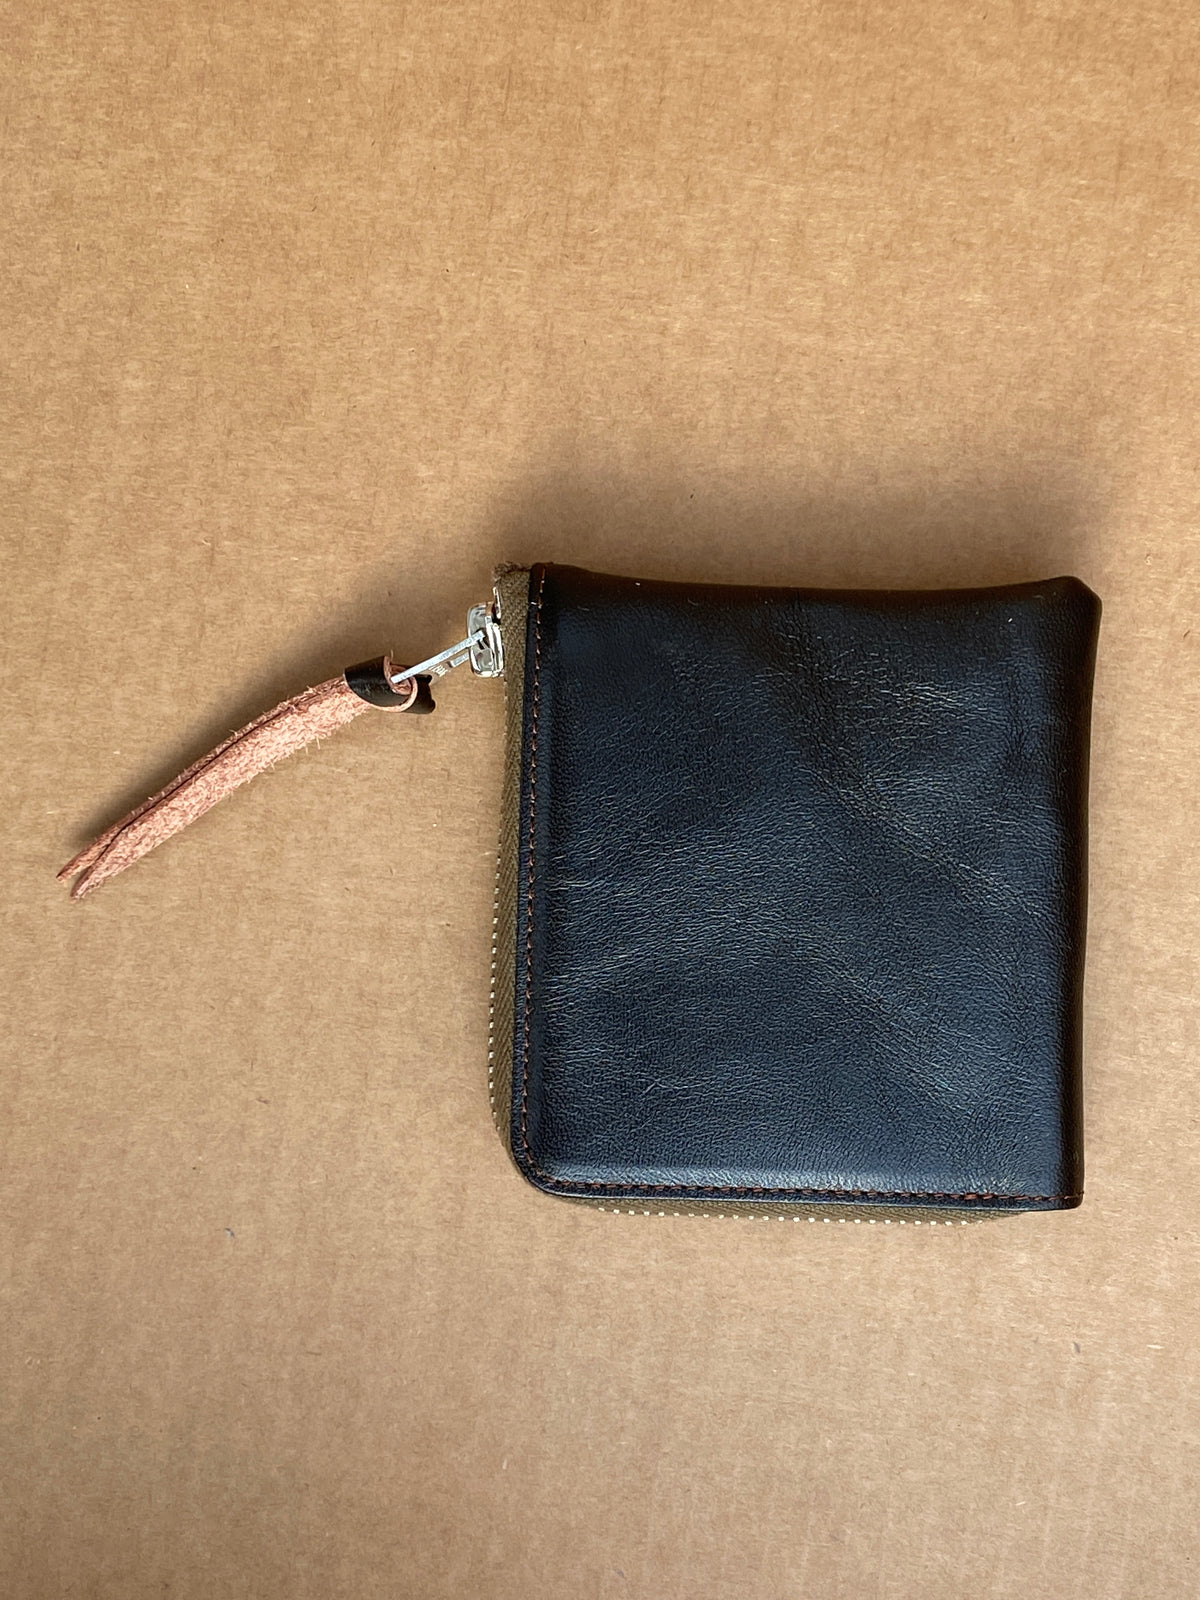 The Real McCoy's MW17100 Horsehide Wallet Brown